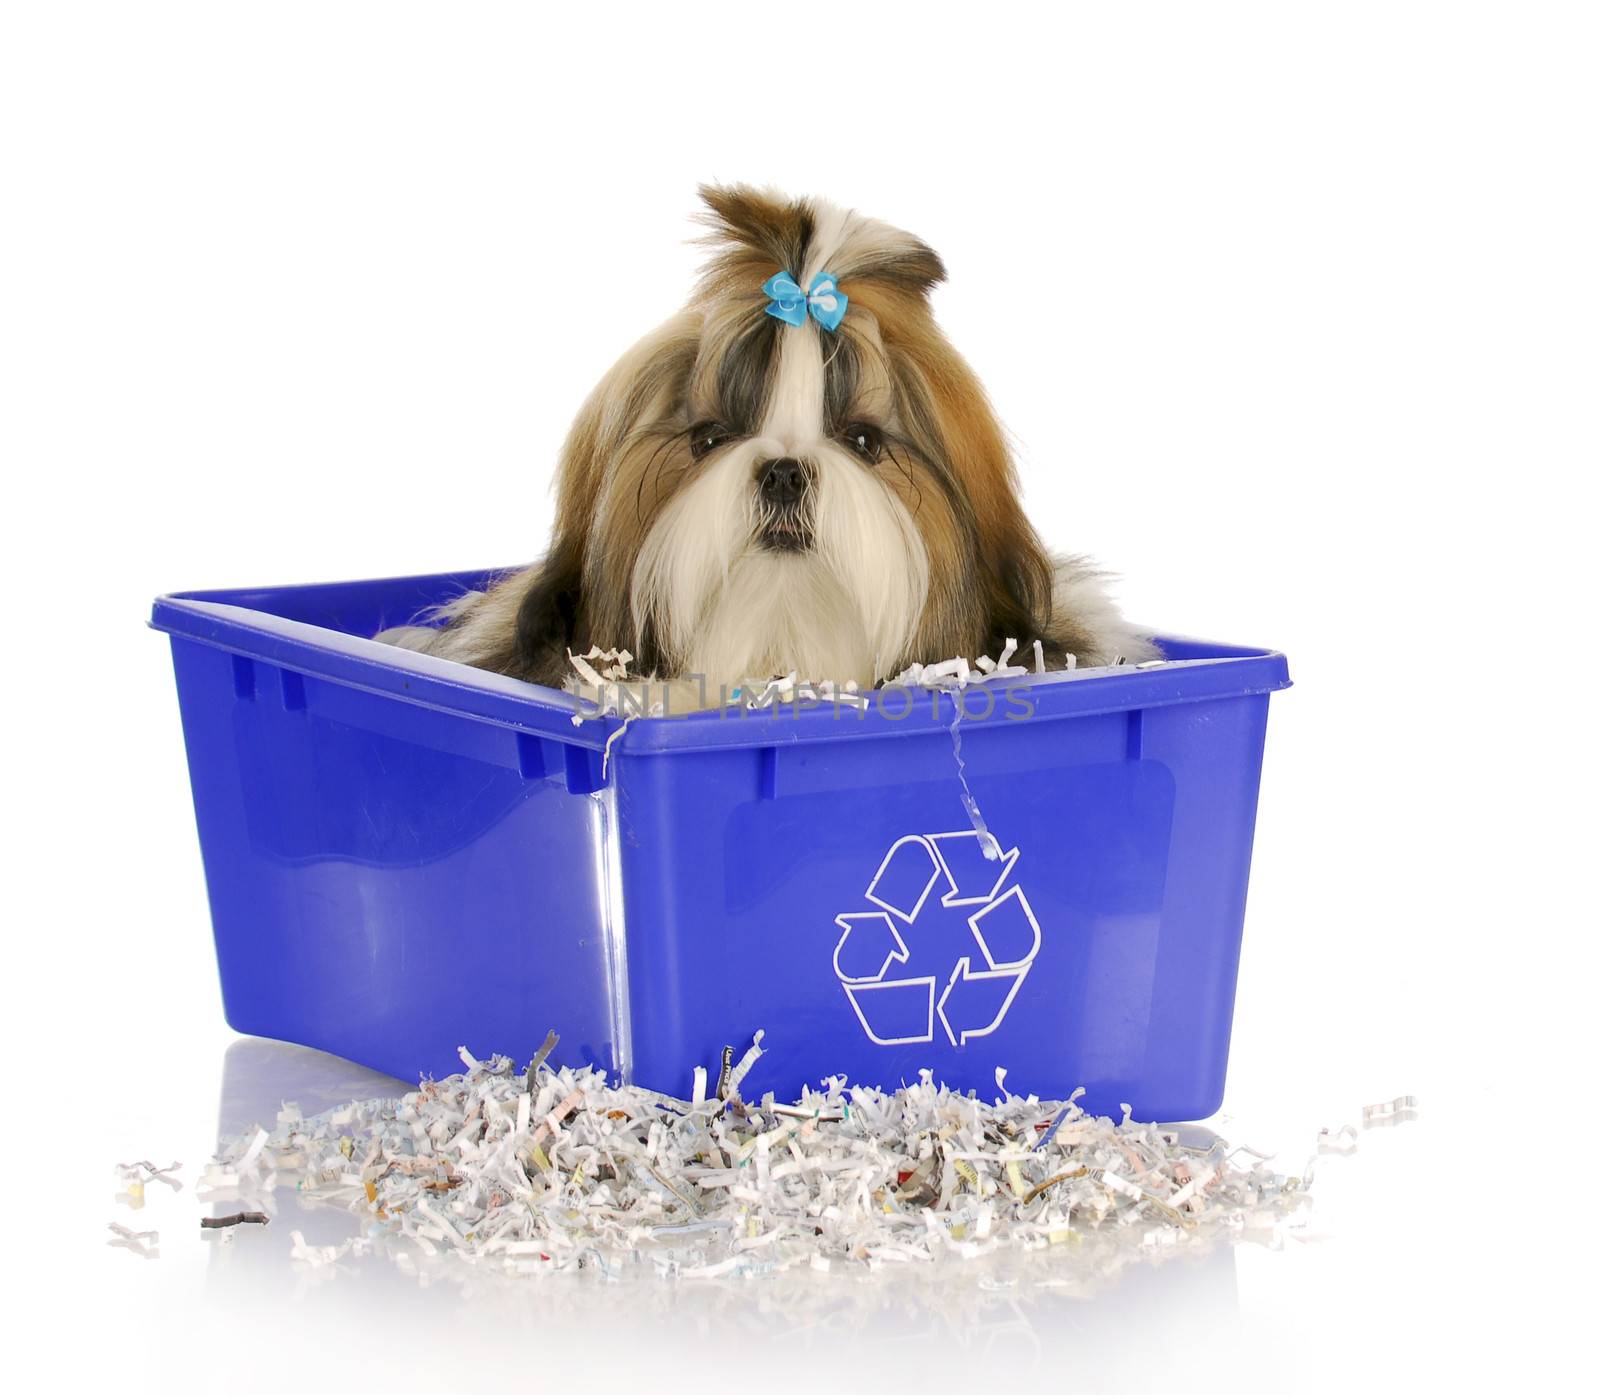 adorable shih tzu puppy sitting in recycle bin on white background